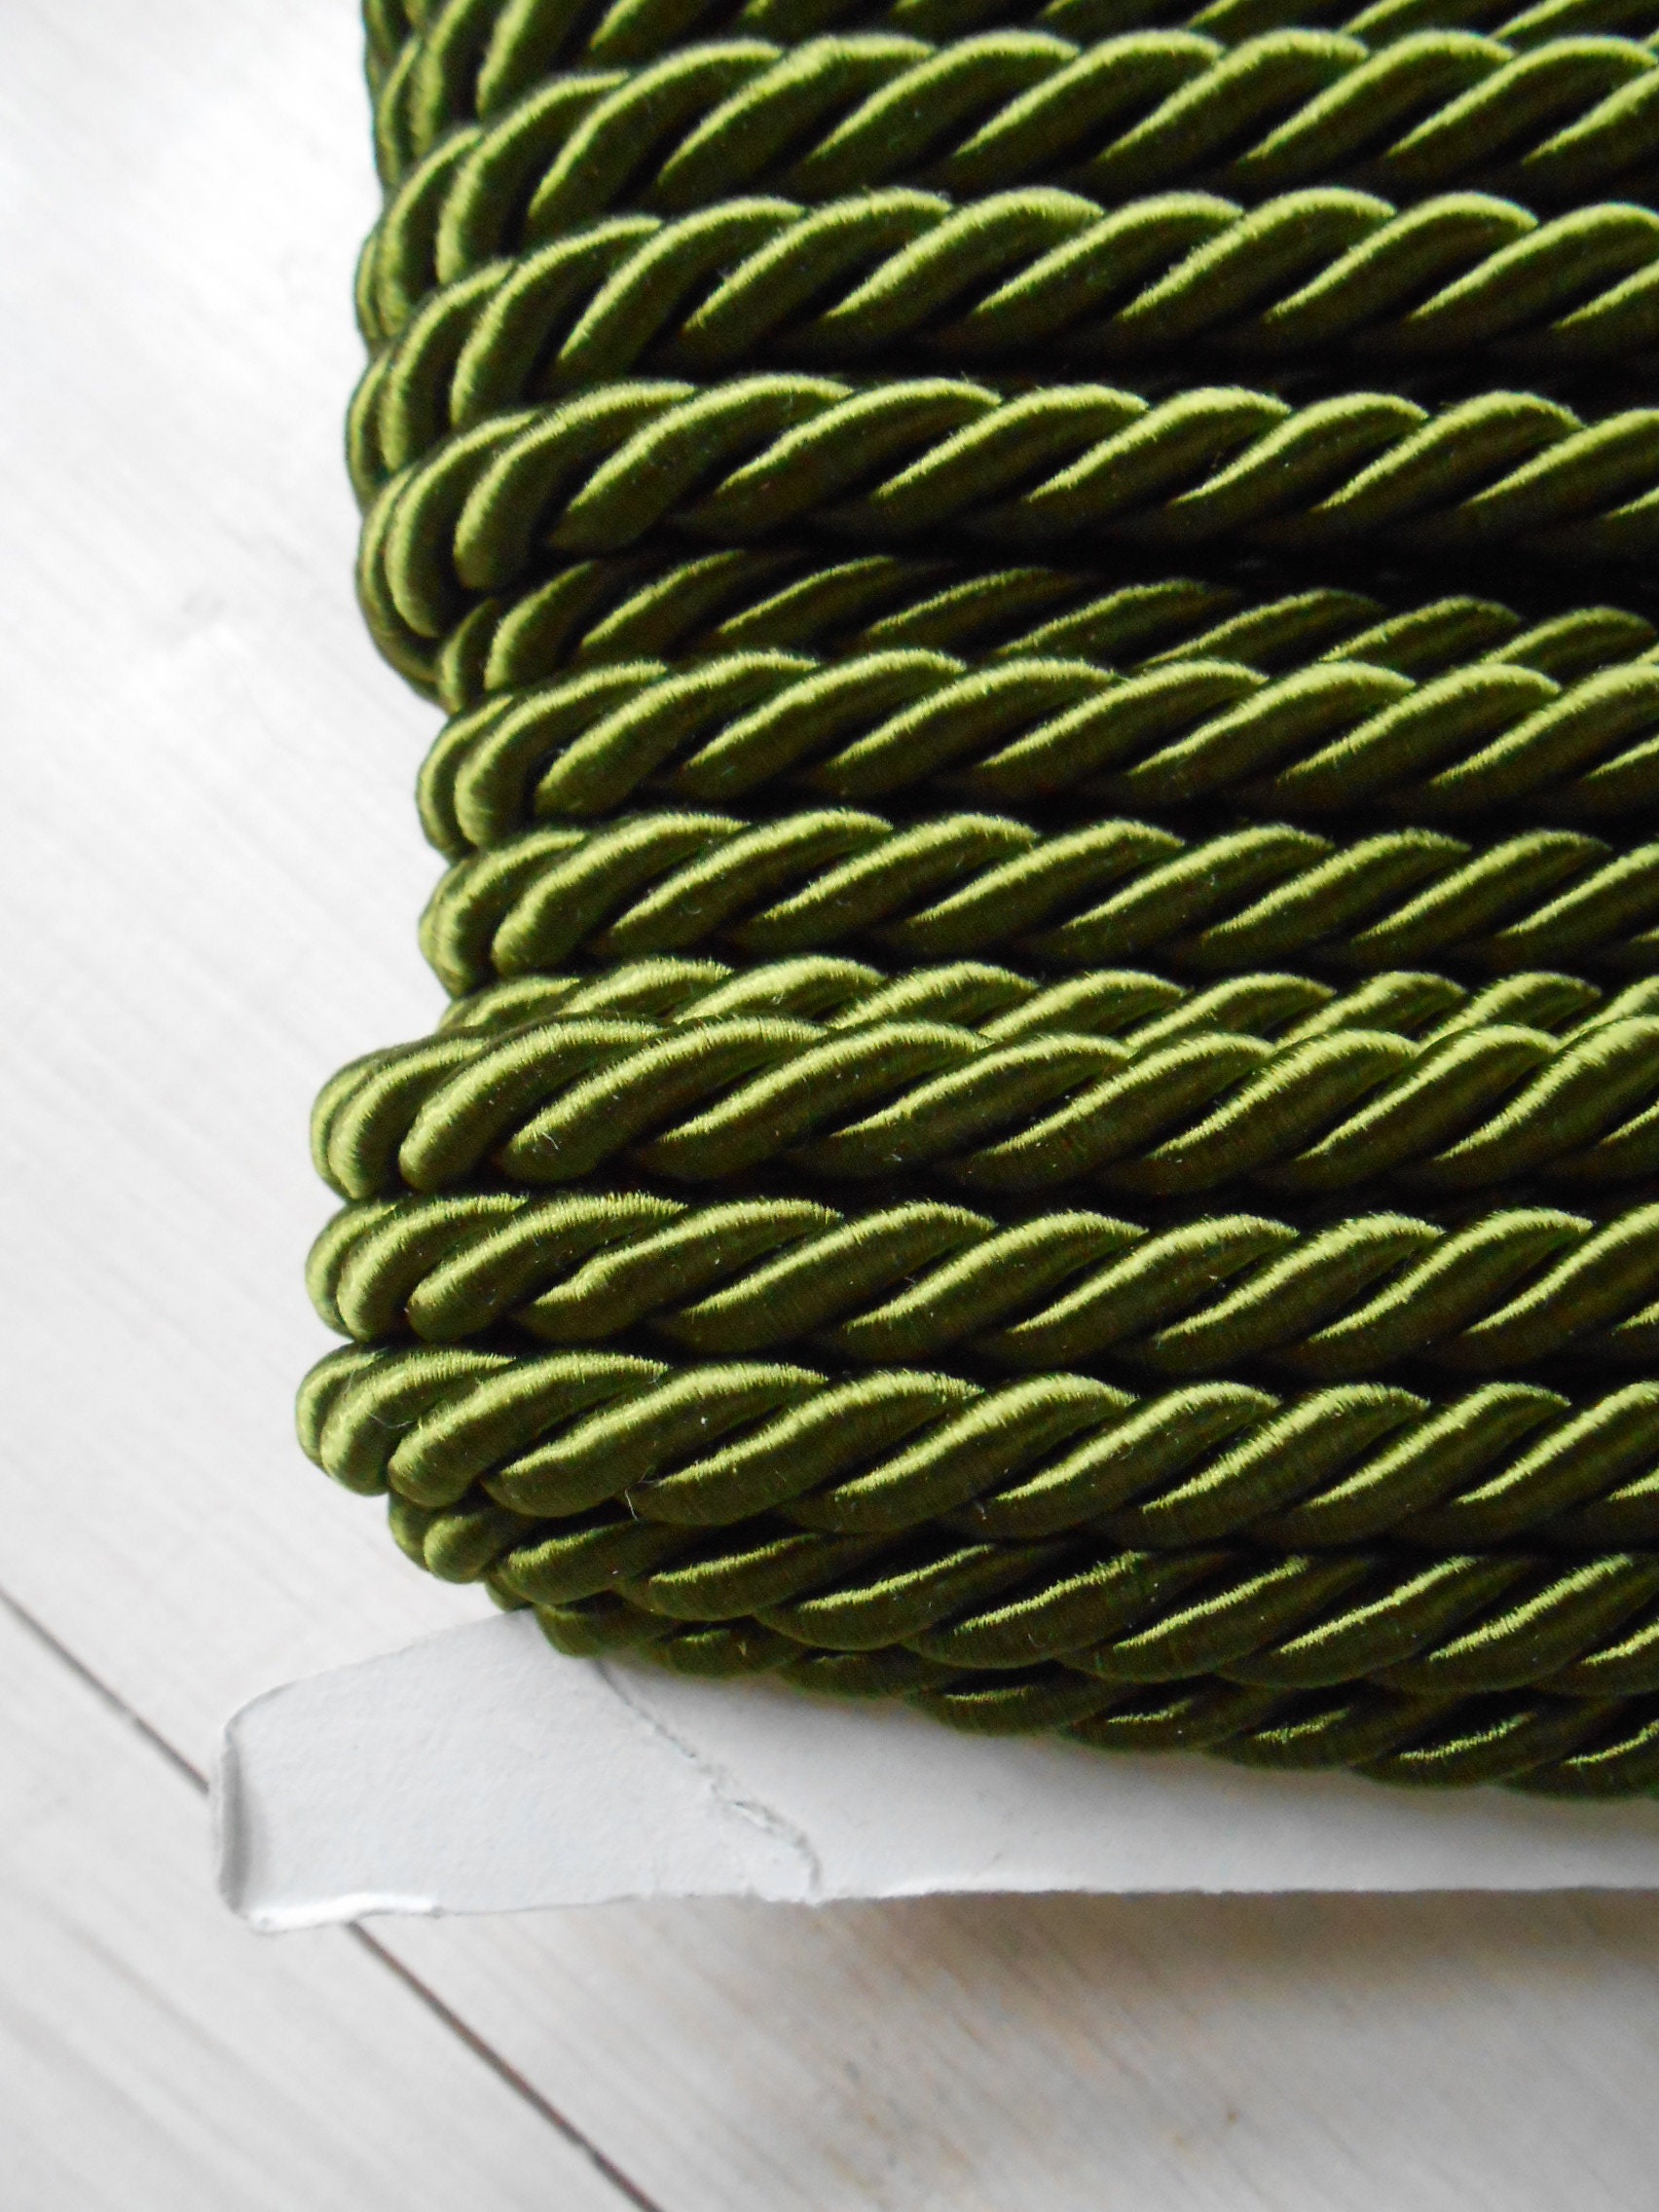 How to make piping for a sewing project - RopesDirect Ropes Direct